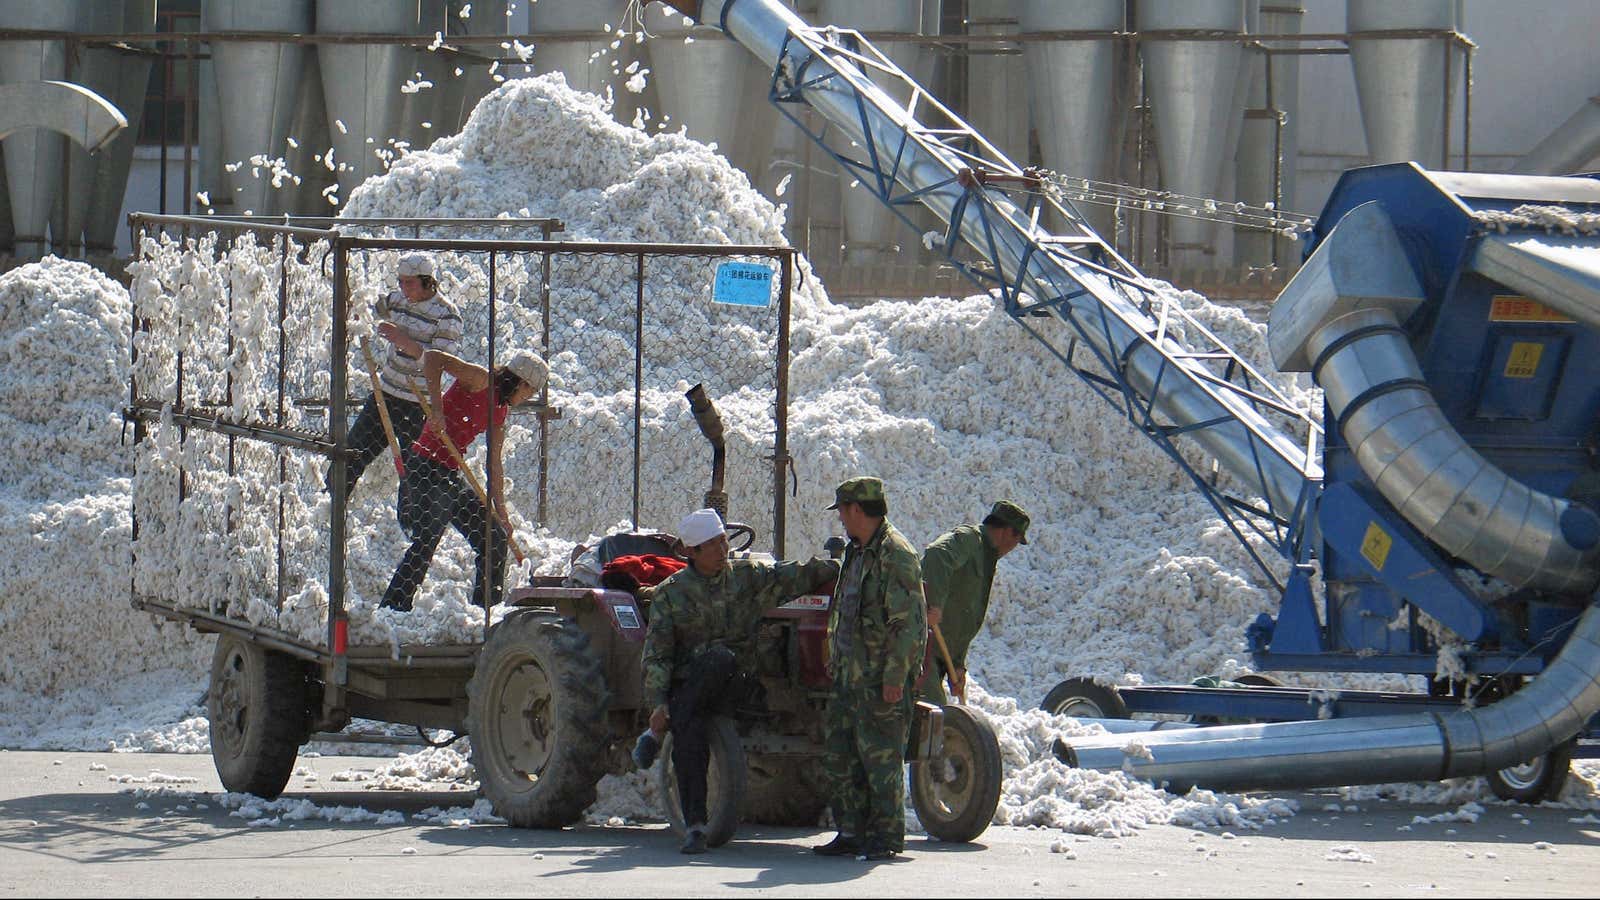 Xinjiang cotton is no longer welcome in the US.